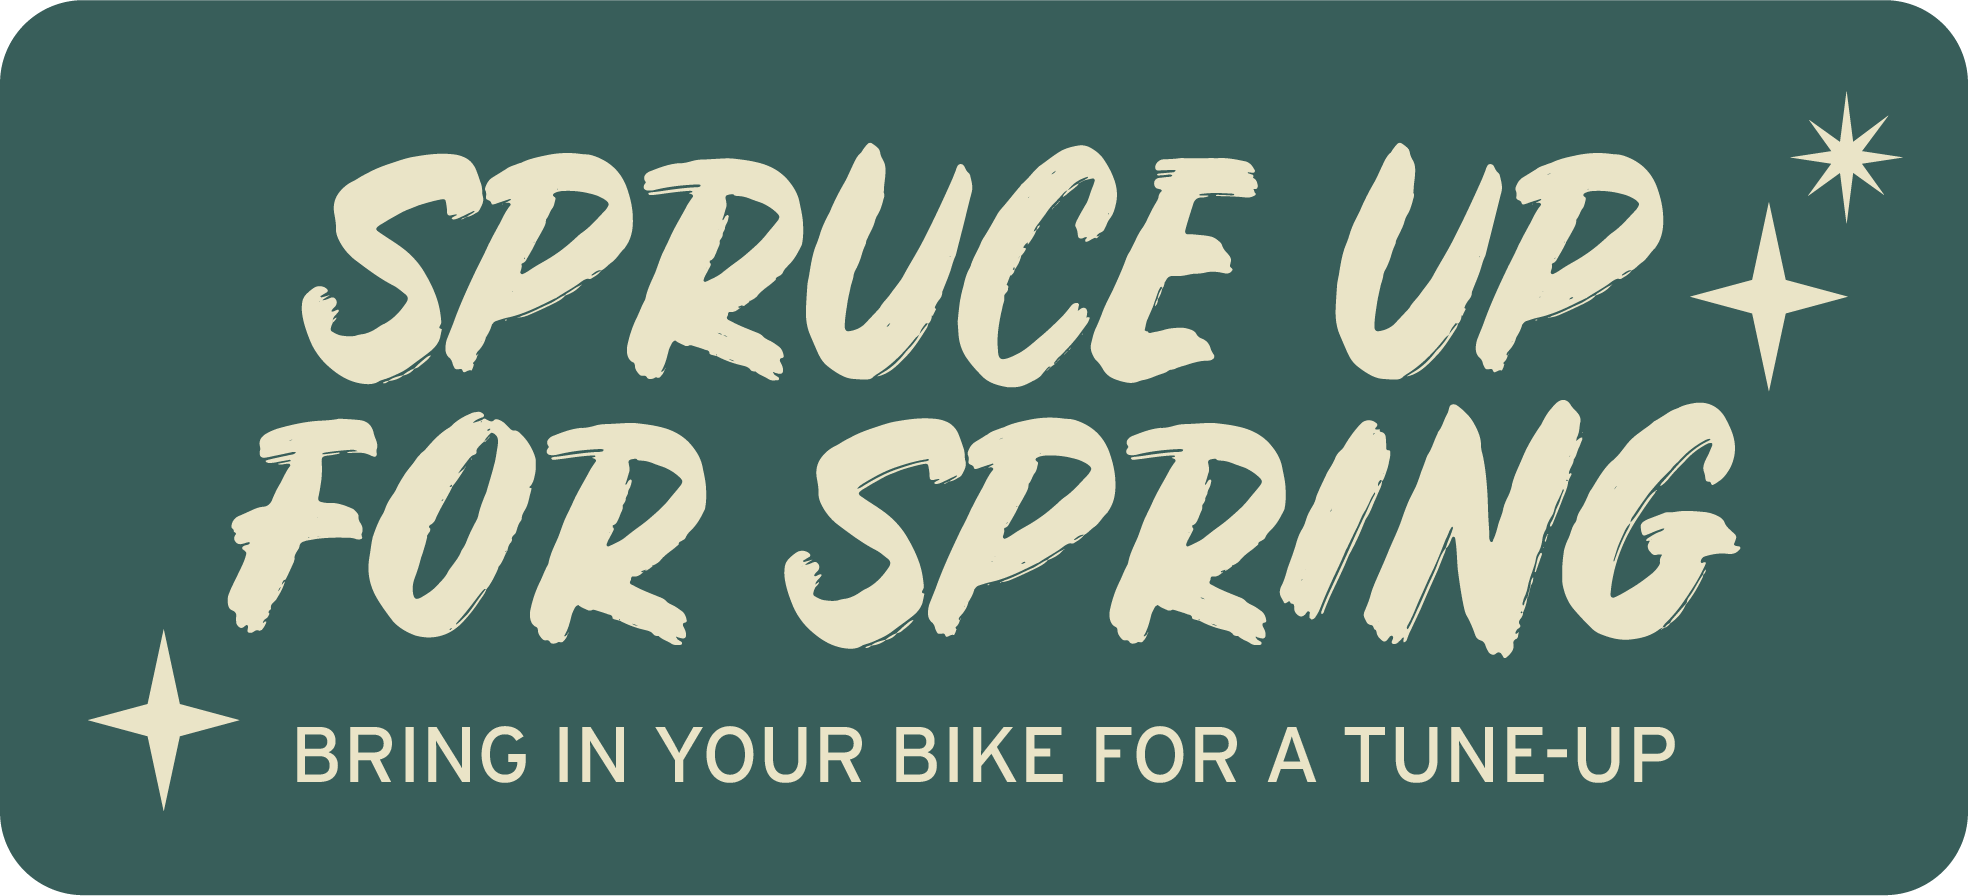 Spruce Up For Spring: Bring in Your Bike for a Tune-Up